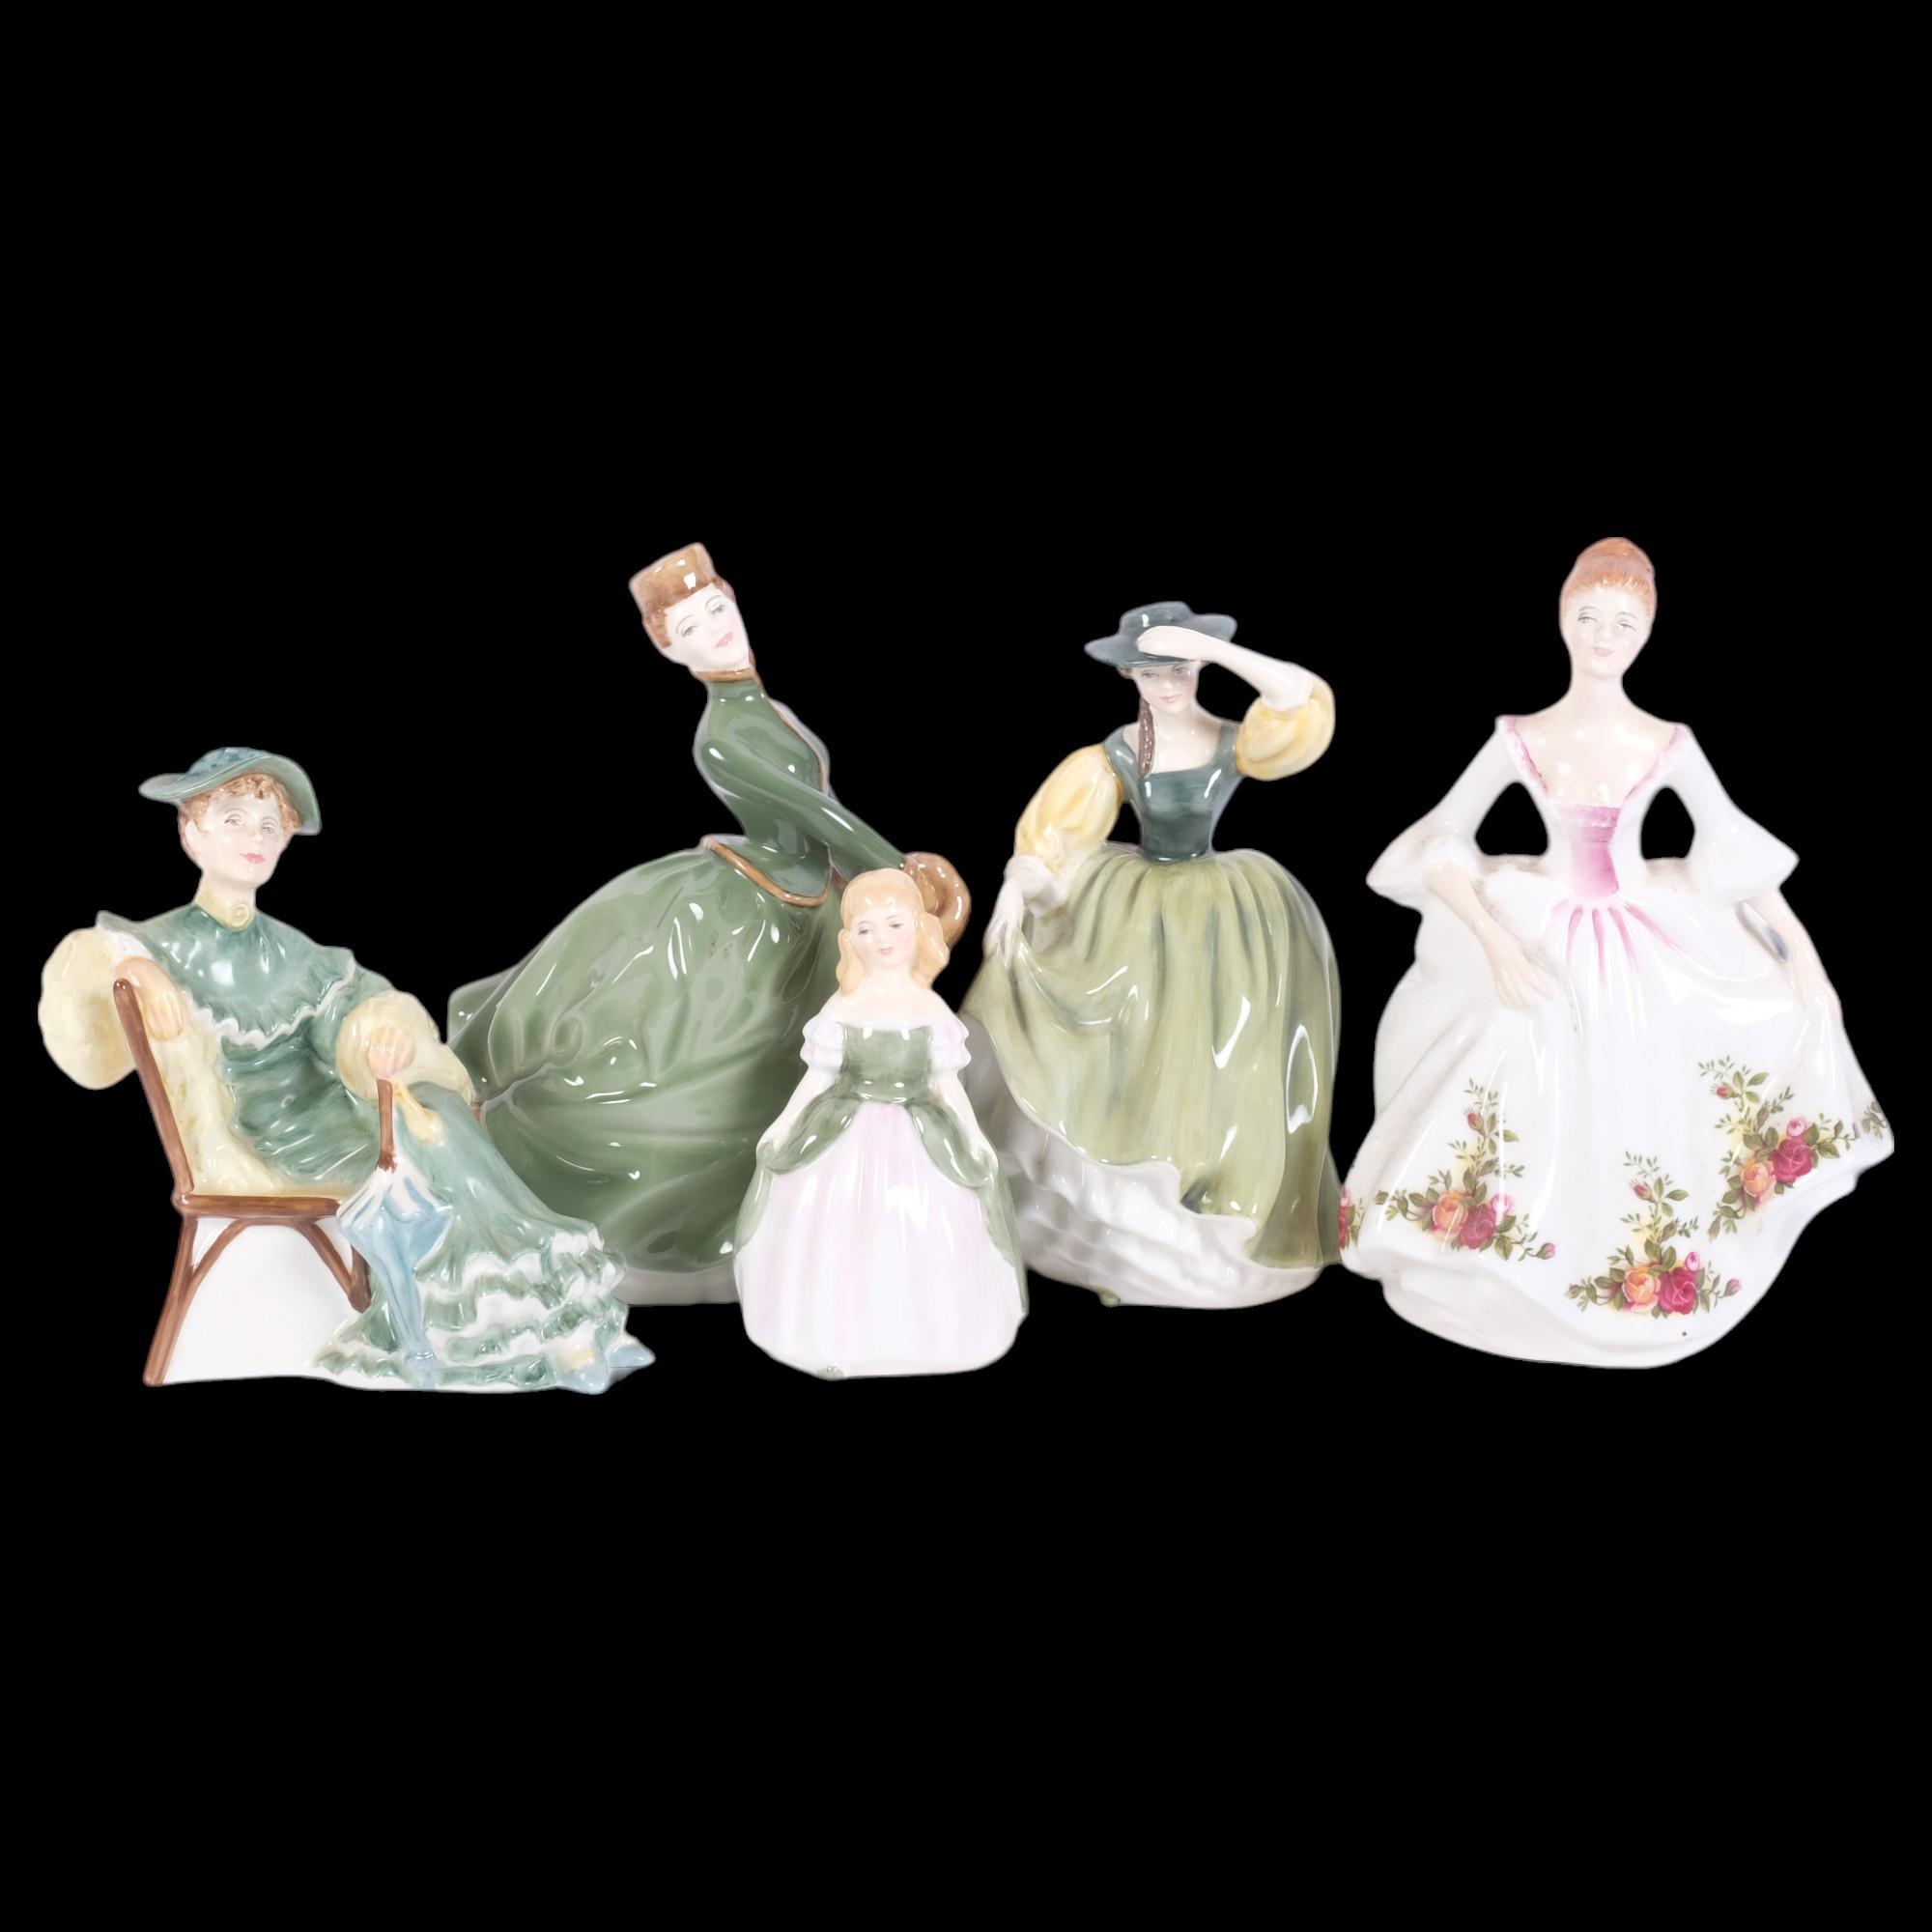 Royal Doulton, 5 various figurines, including Buttercup HN2309, Country Rose HN3221, Grace HN2318,